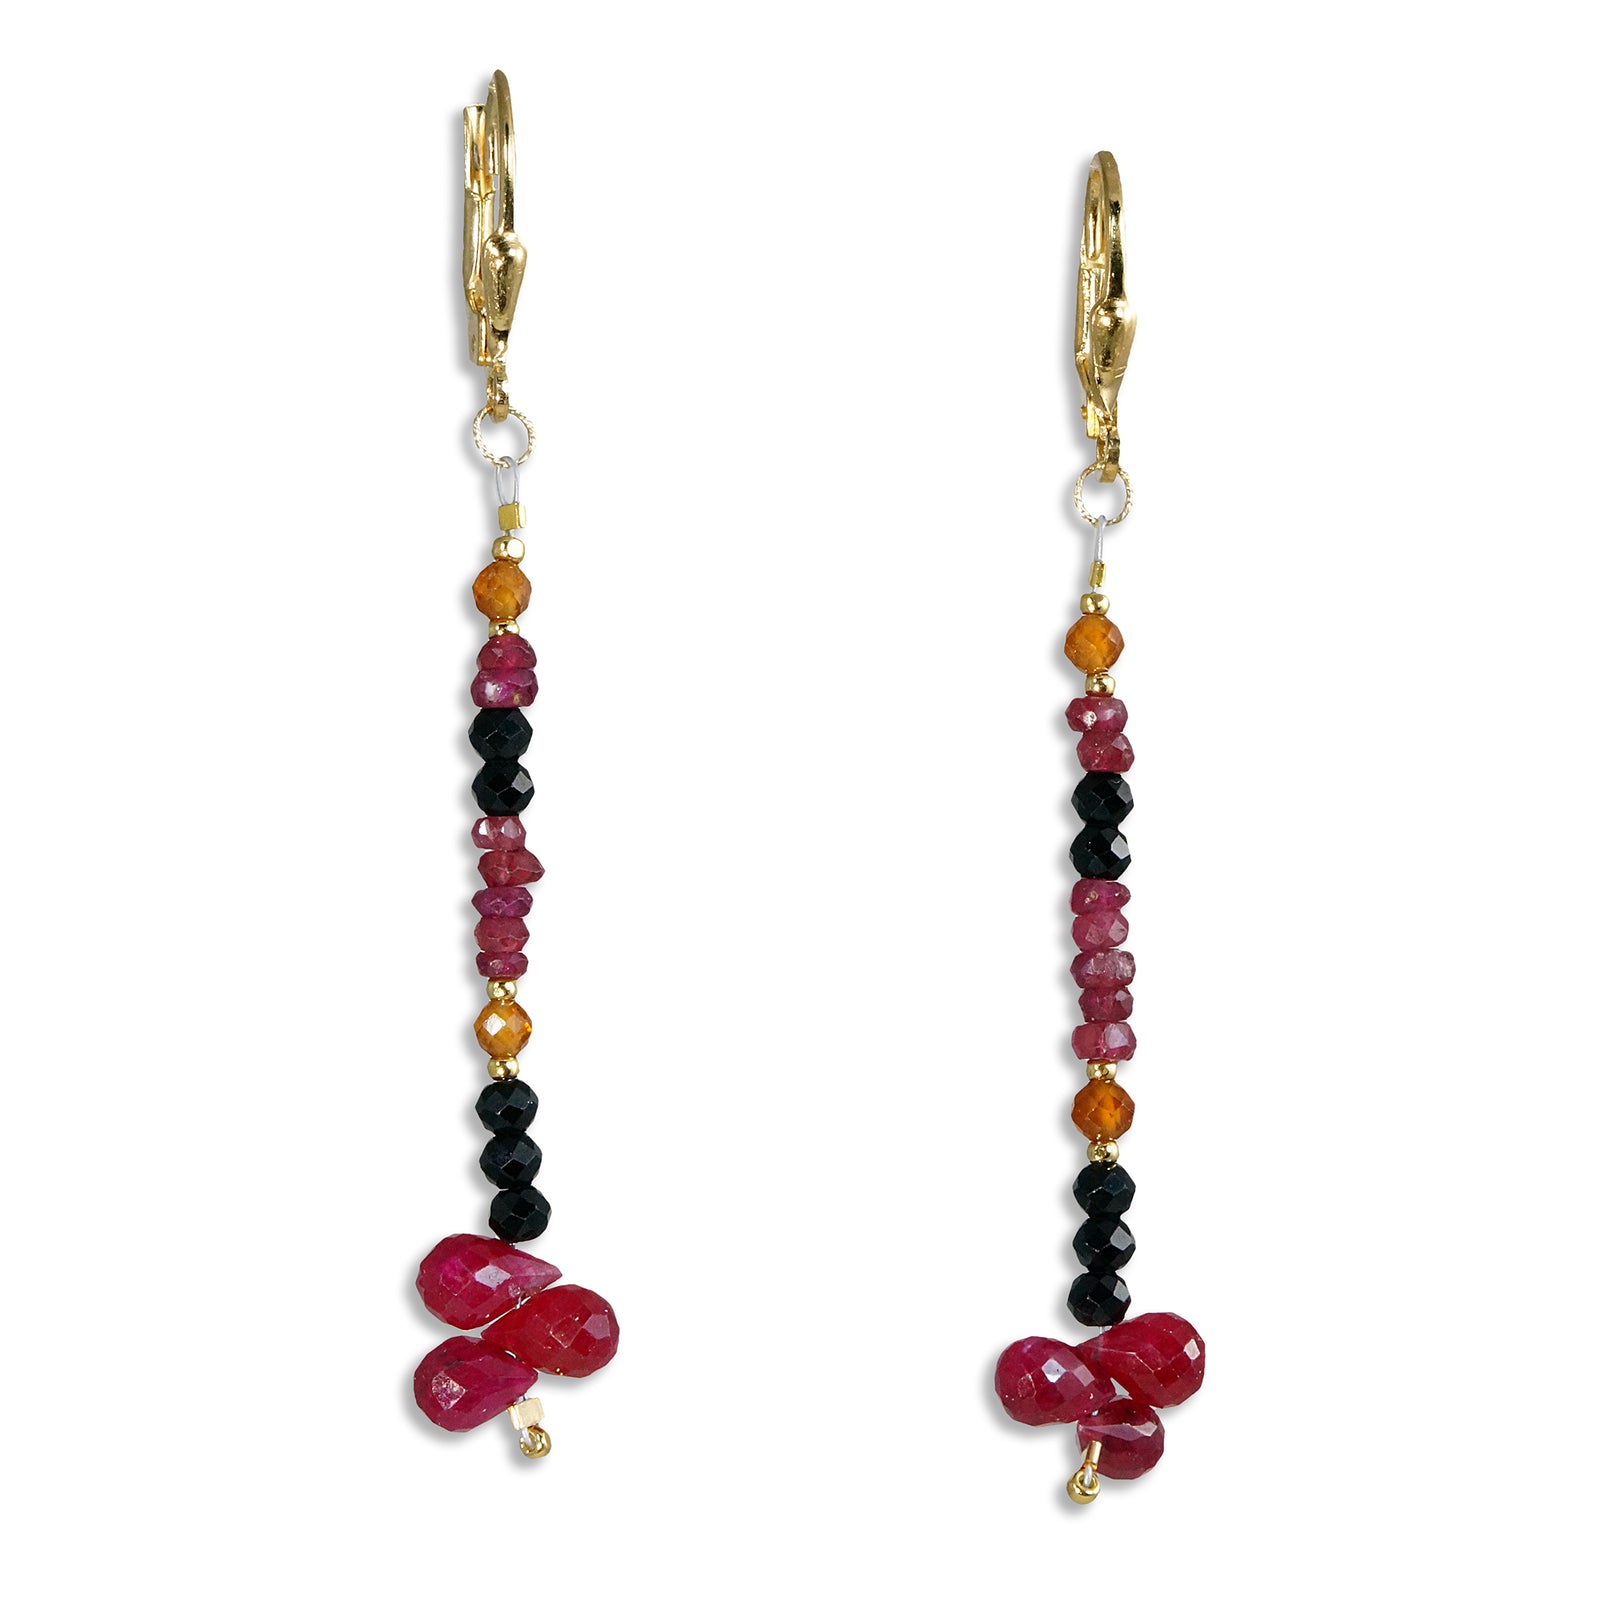 Gold Leverback Earrings with Black Spinel, Ruby, Hessonite